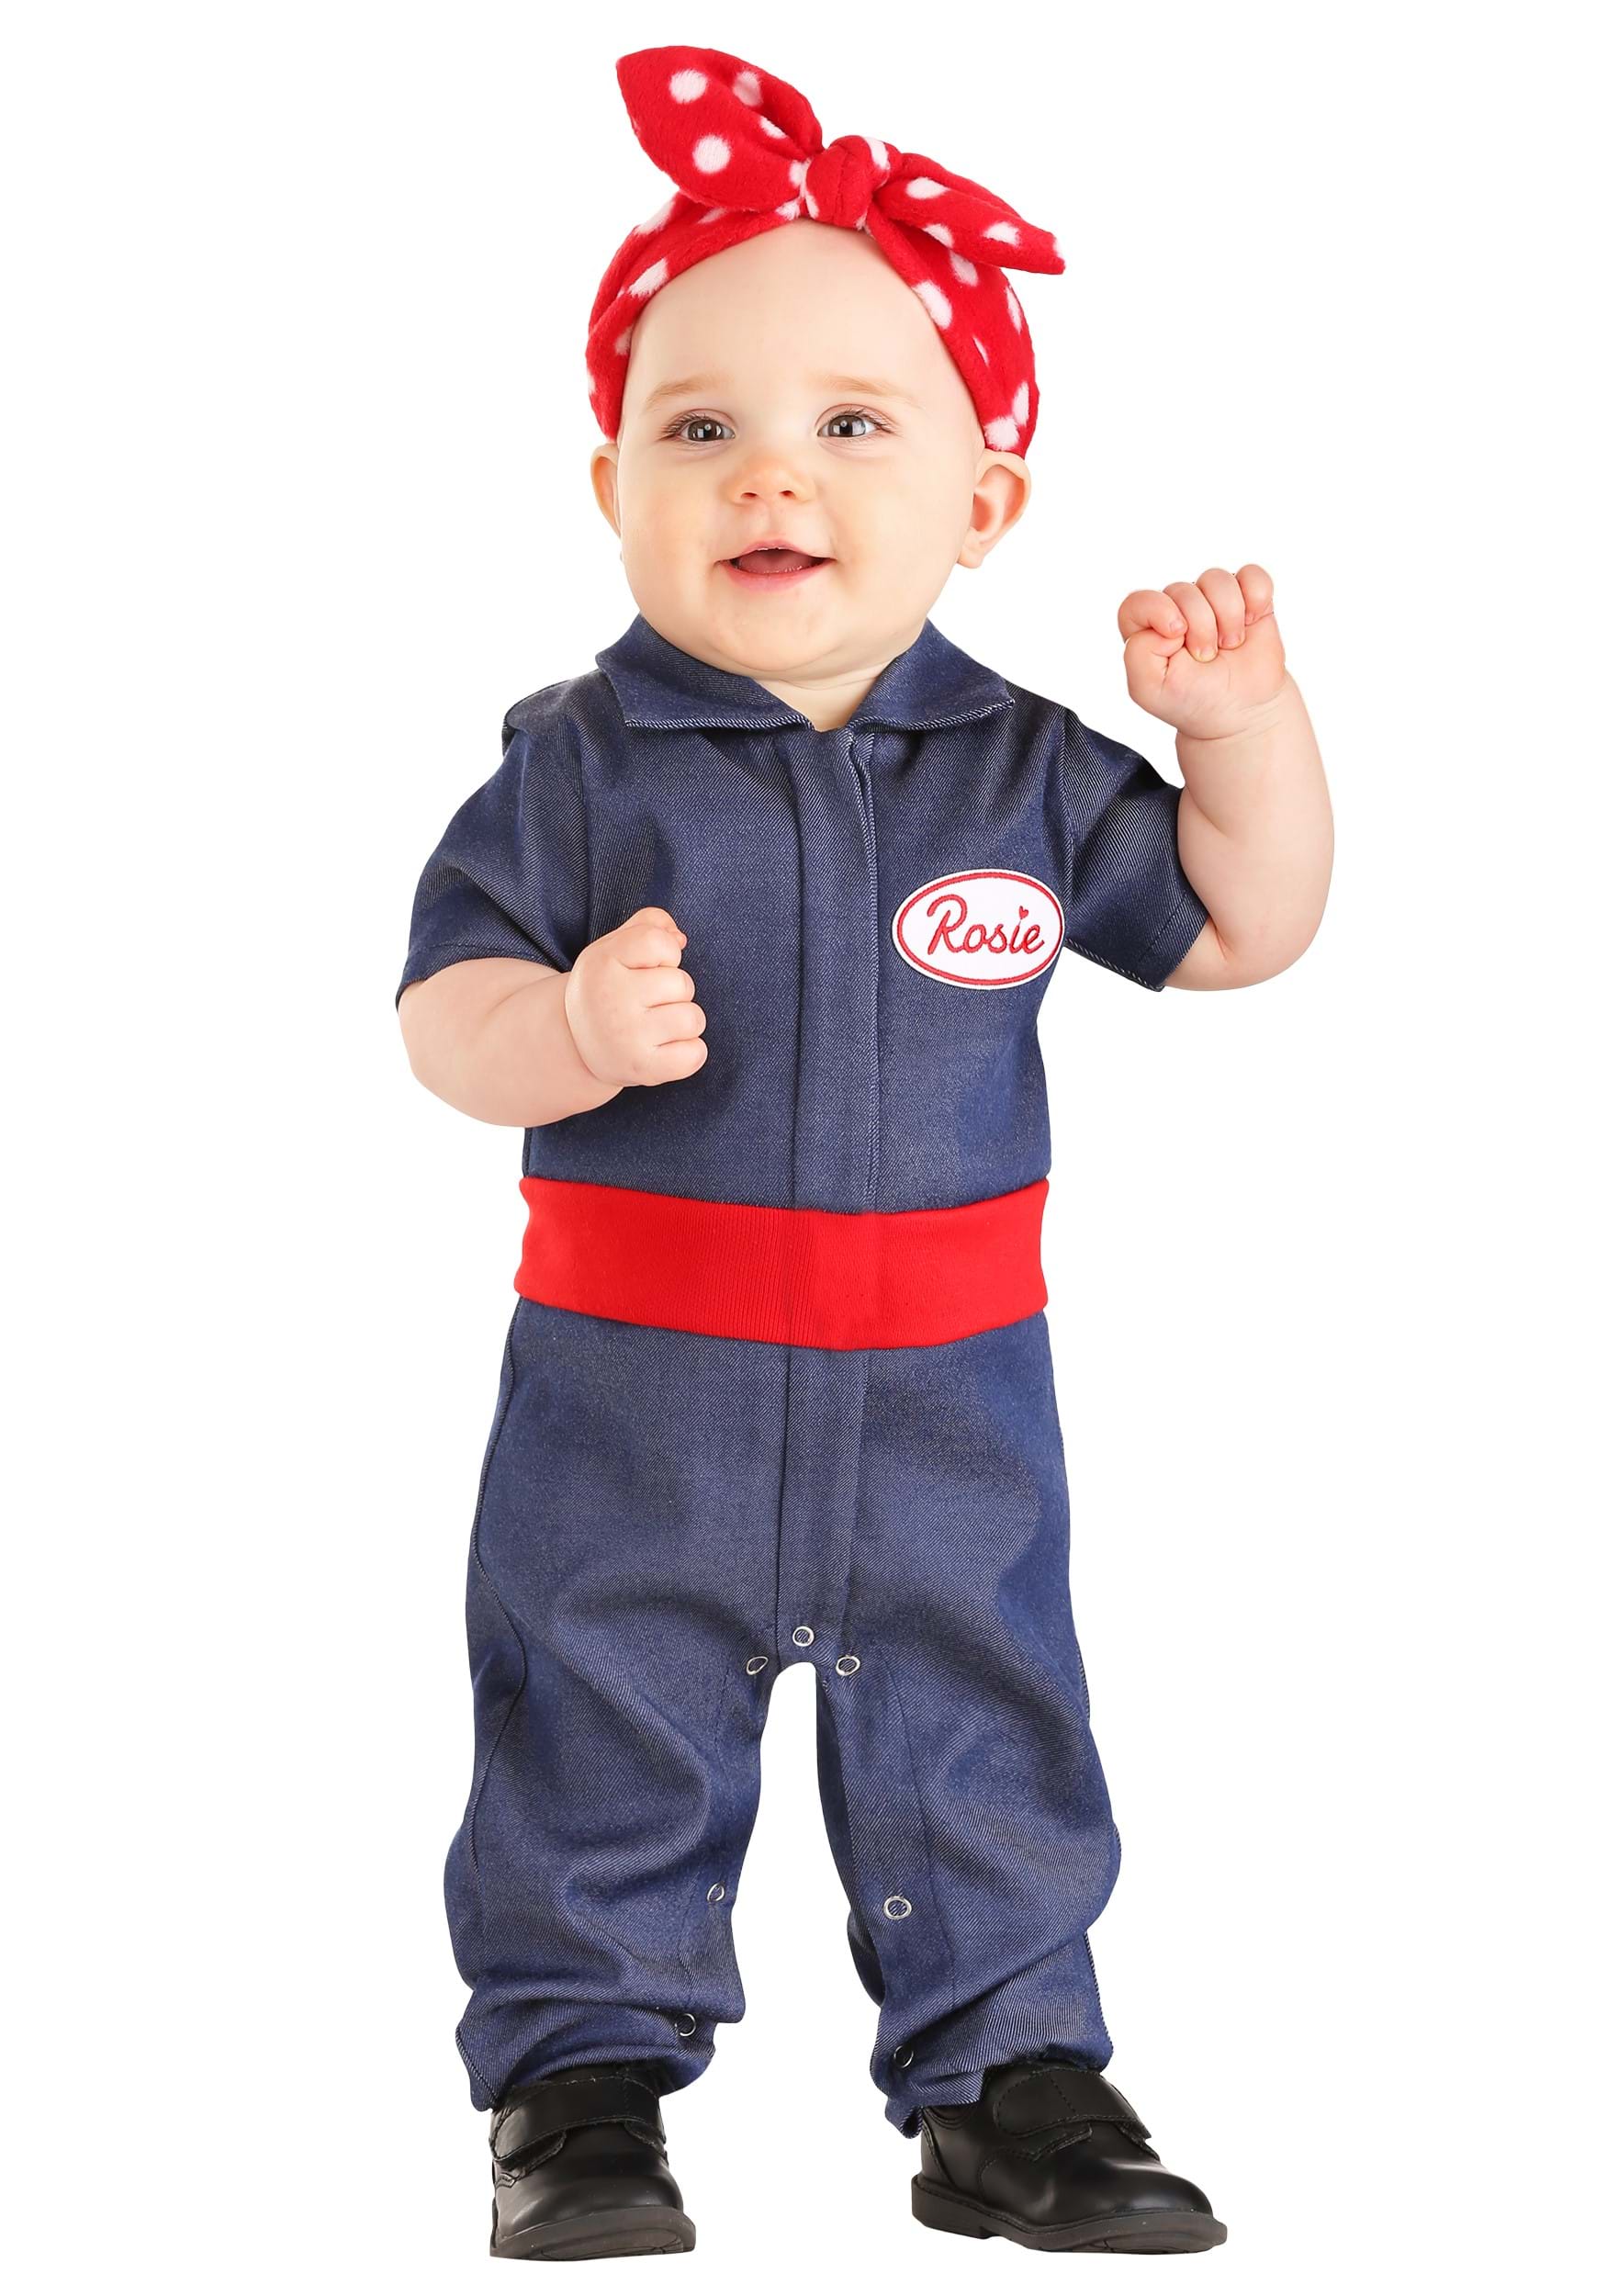 Photos - Fancy Dress FUN Costumes Rosie the Riveter Infant Costume Blue/Red/White FUN15